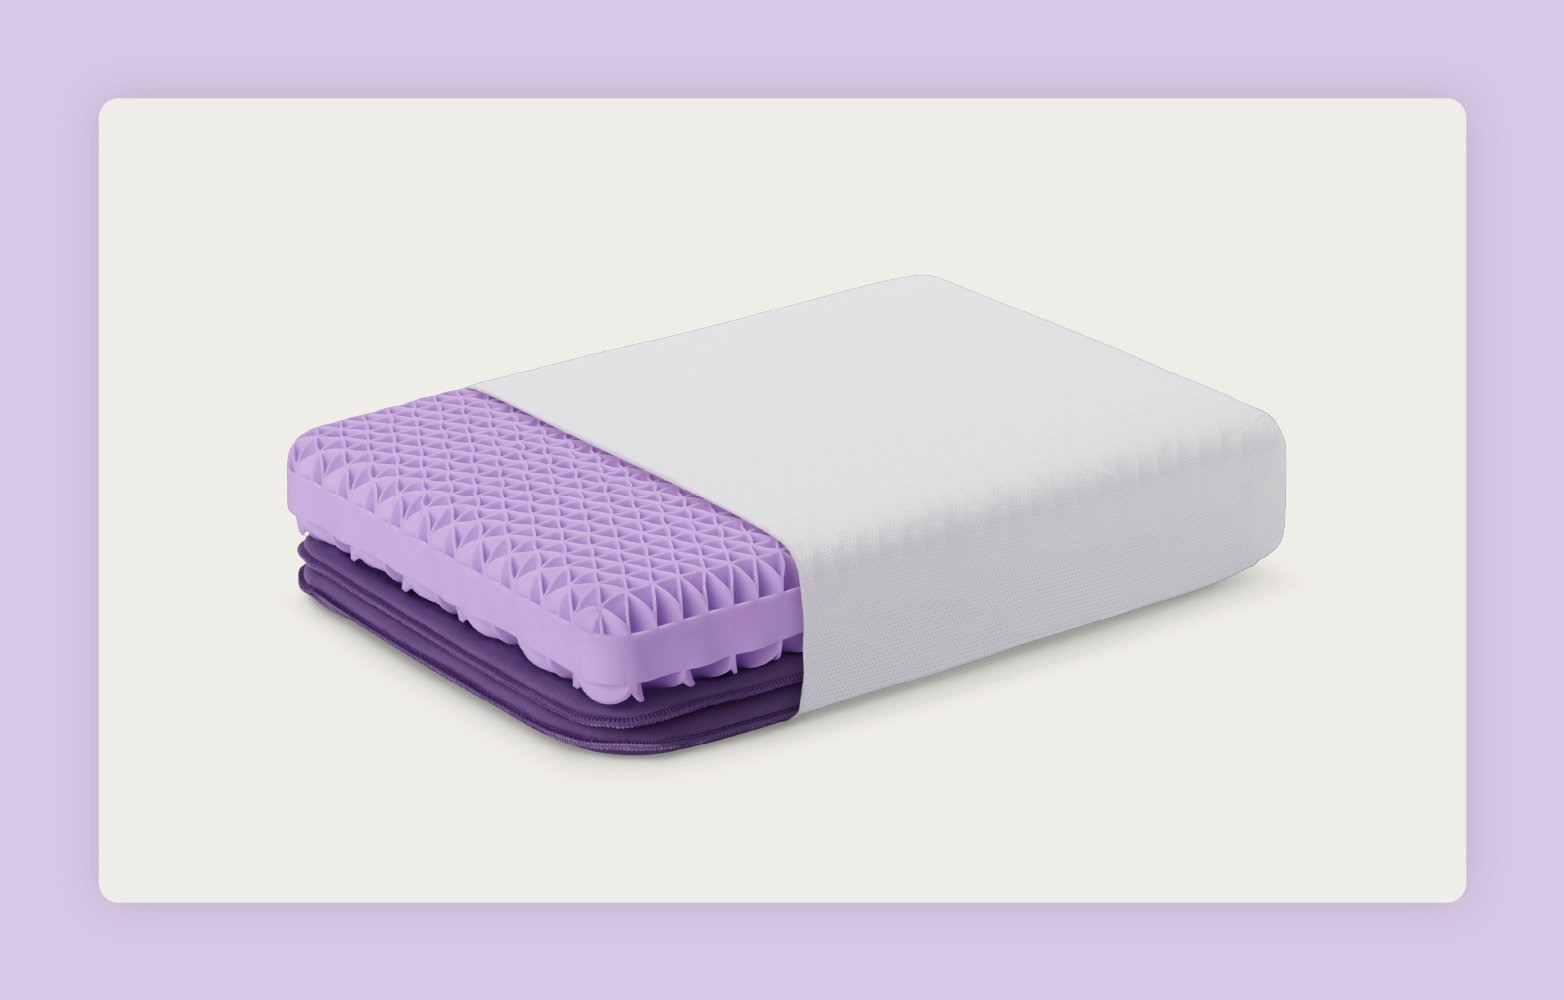 The Purple Pillow® partially shows the GelFlex® Grid and Purple Pillow Boosters.